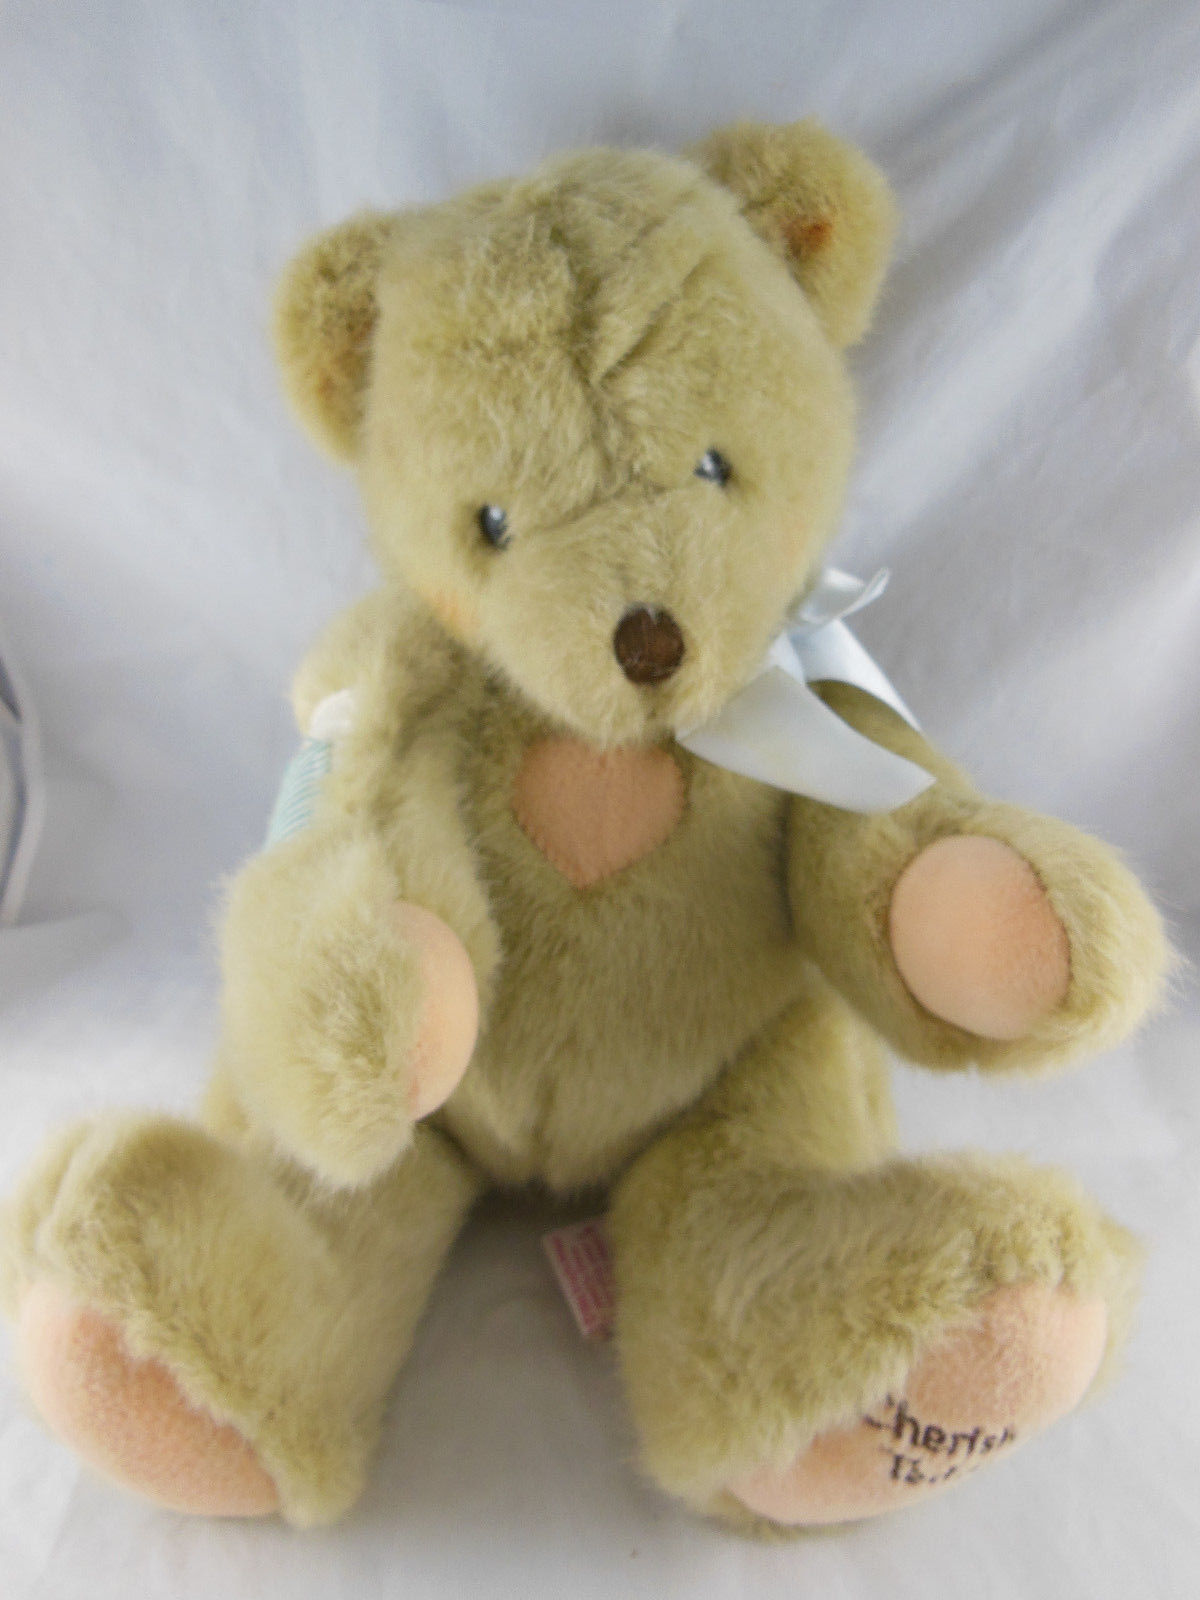 Primary image for Cherished Teddies plush Teddy bear Vintage Dakin Hillman 1994 fully jointed